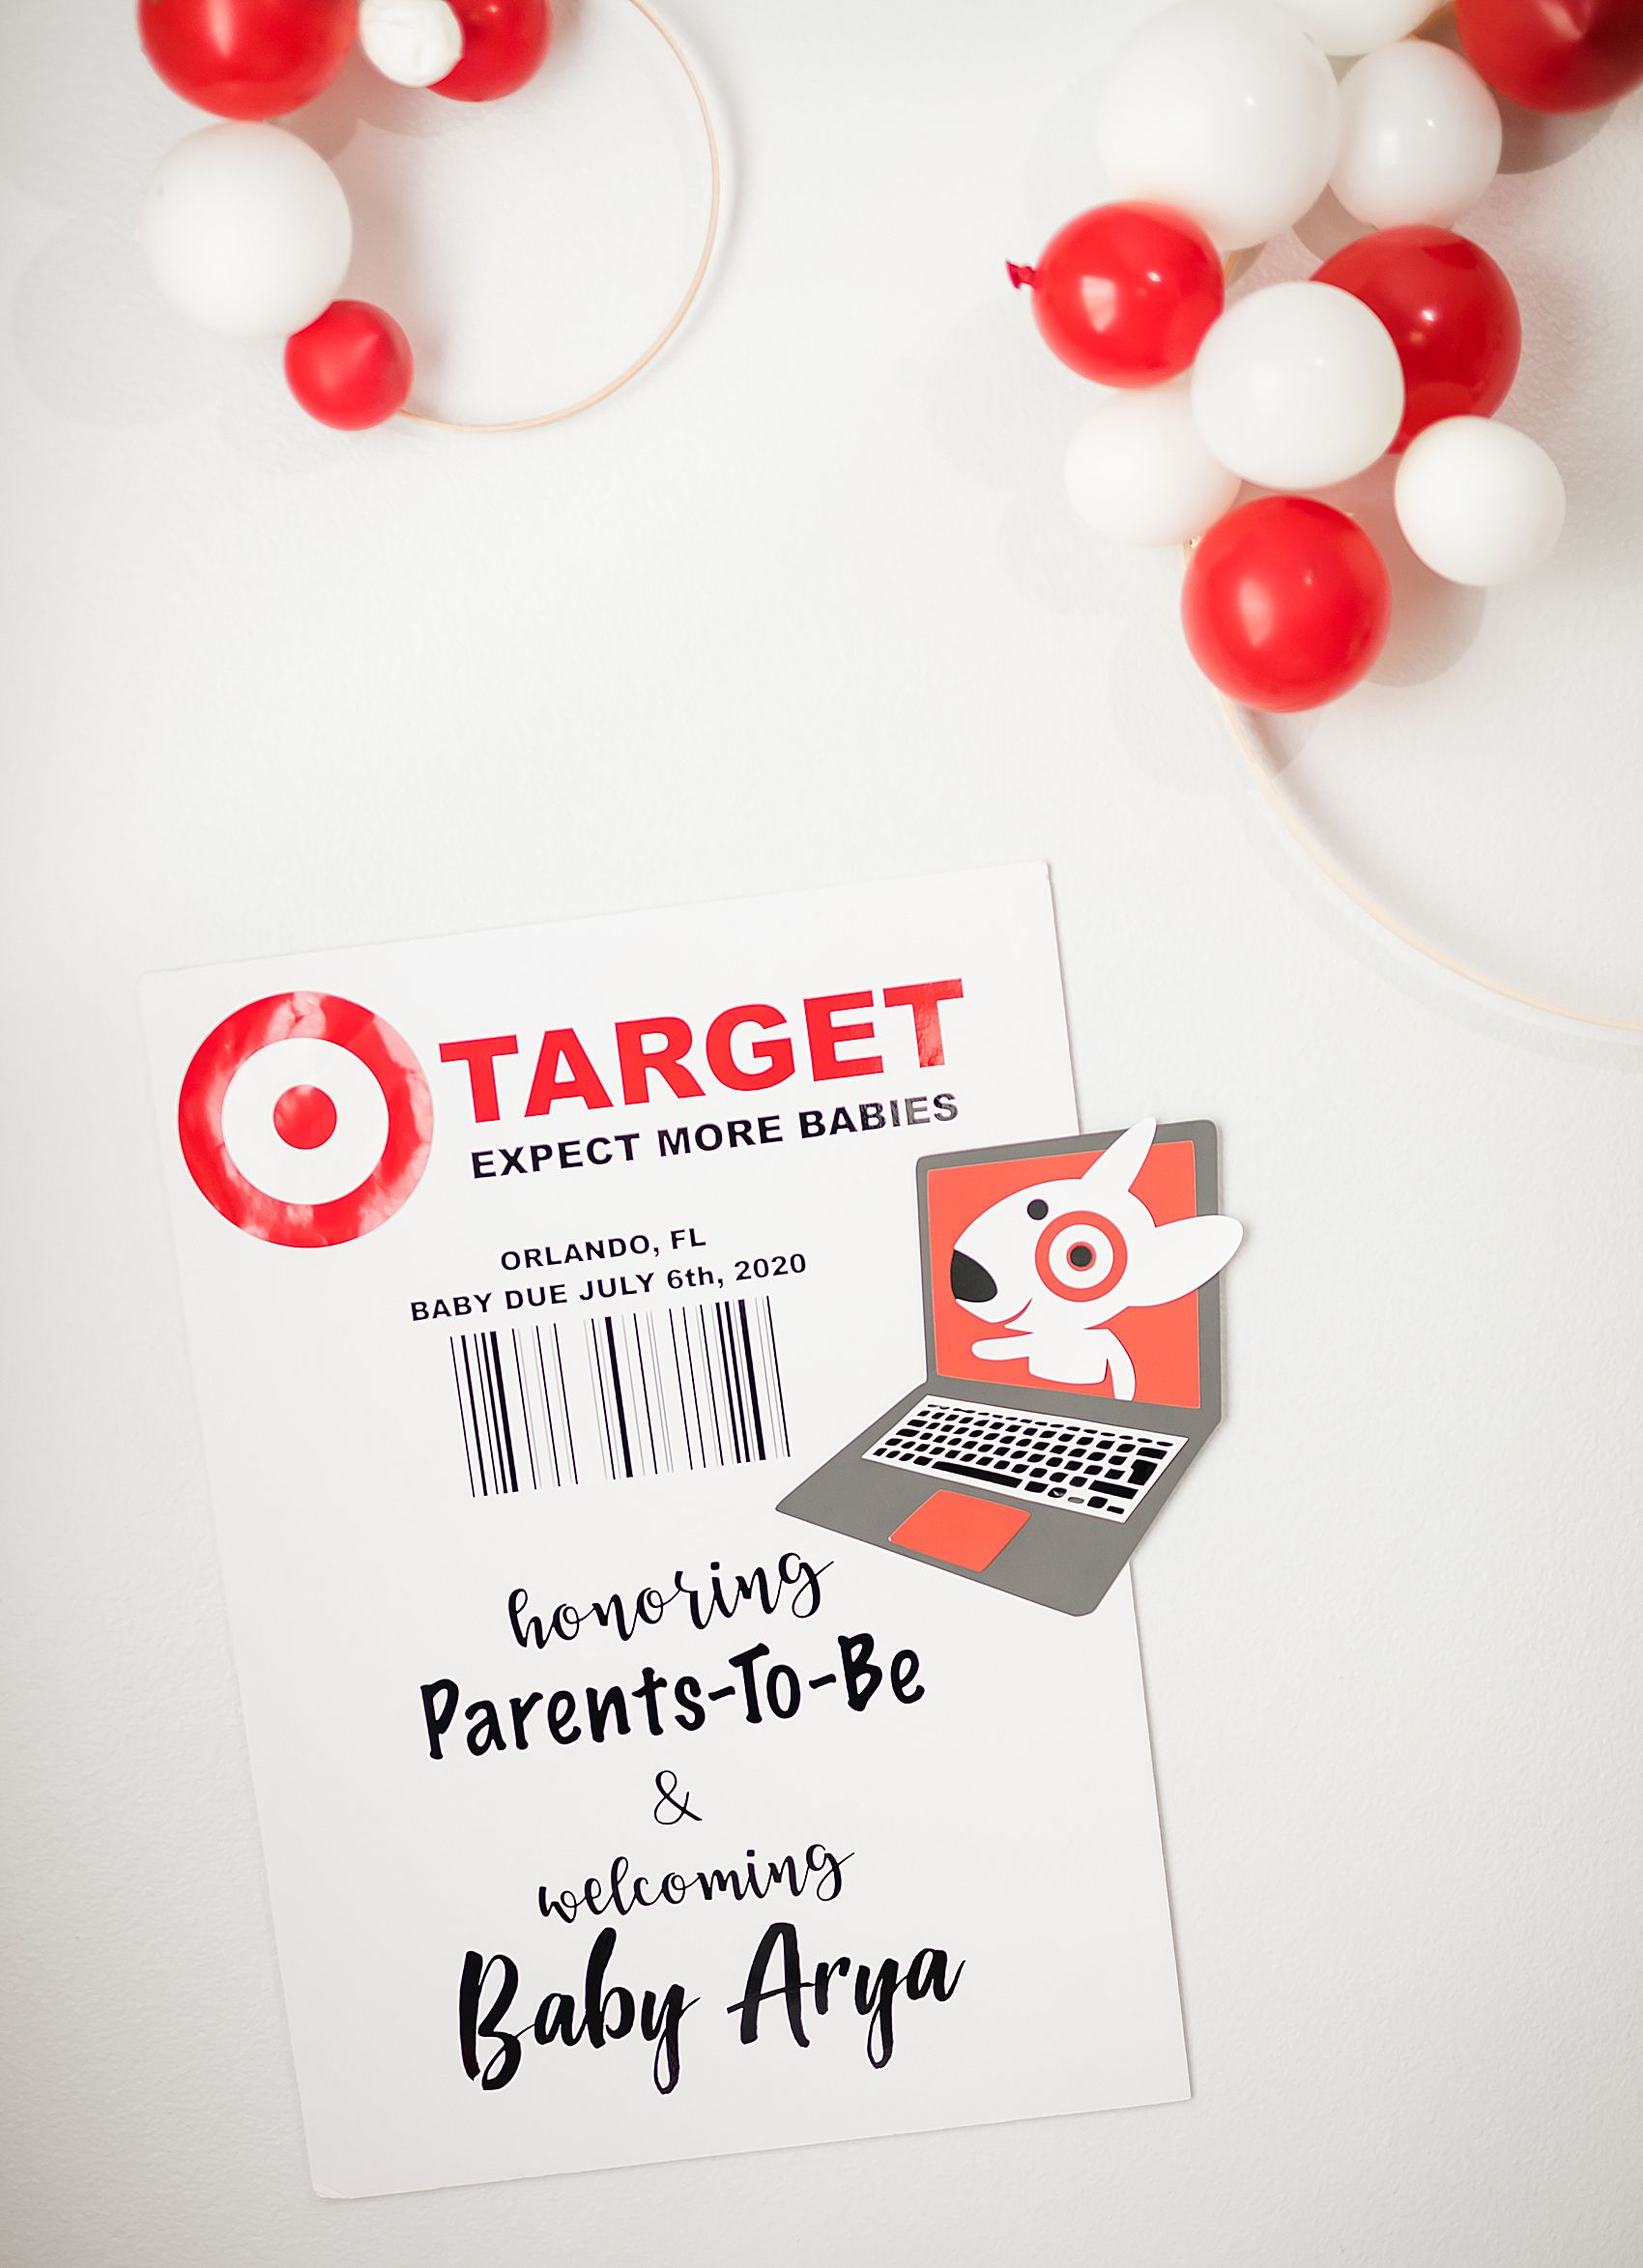 Target theme party sign receipt